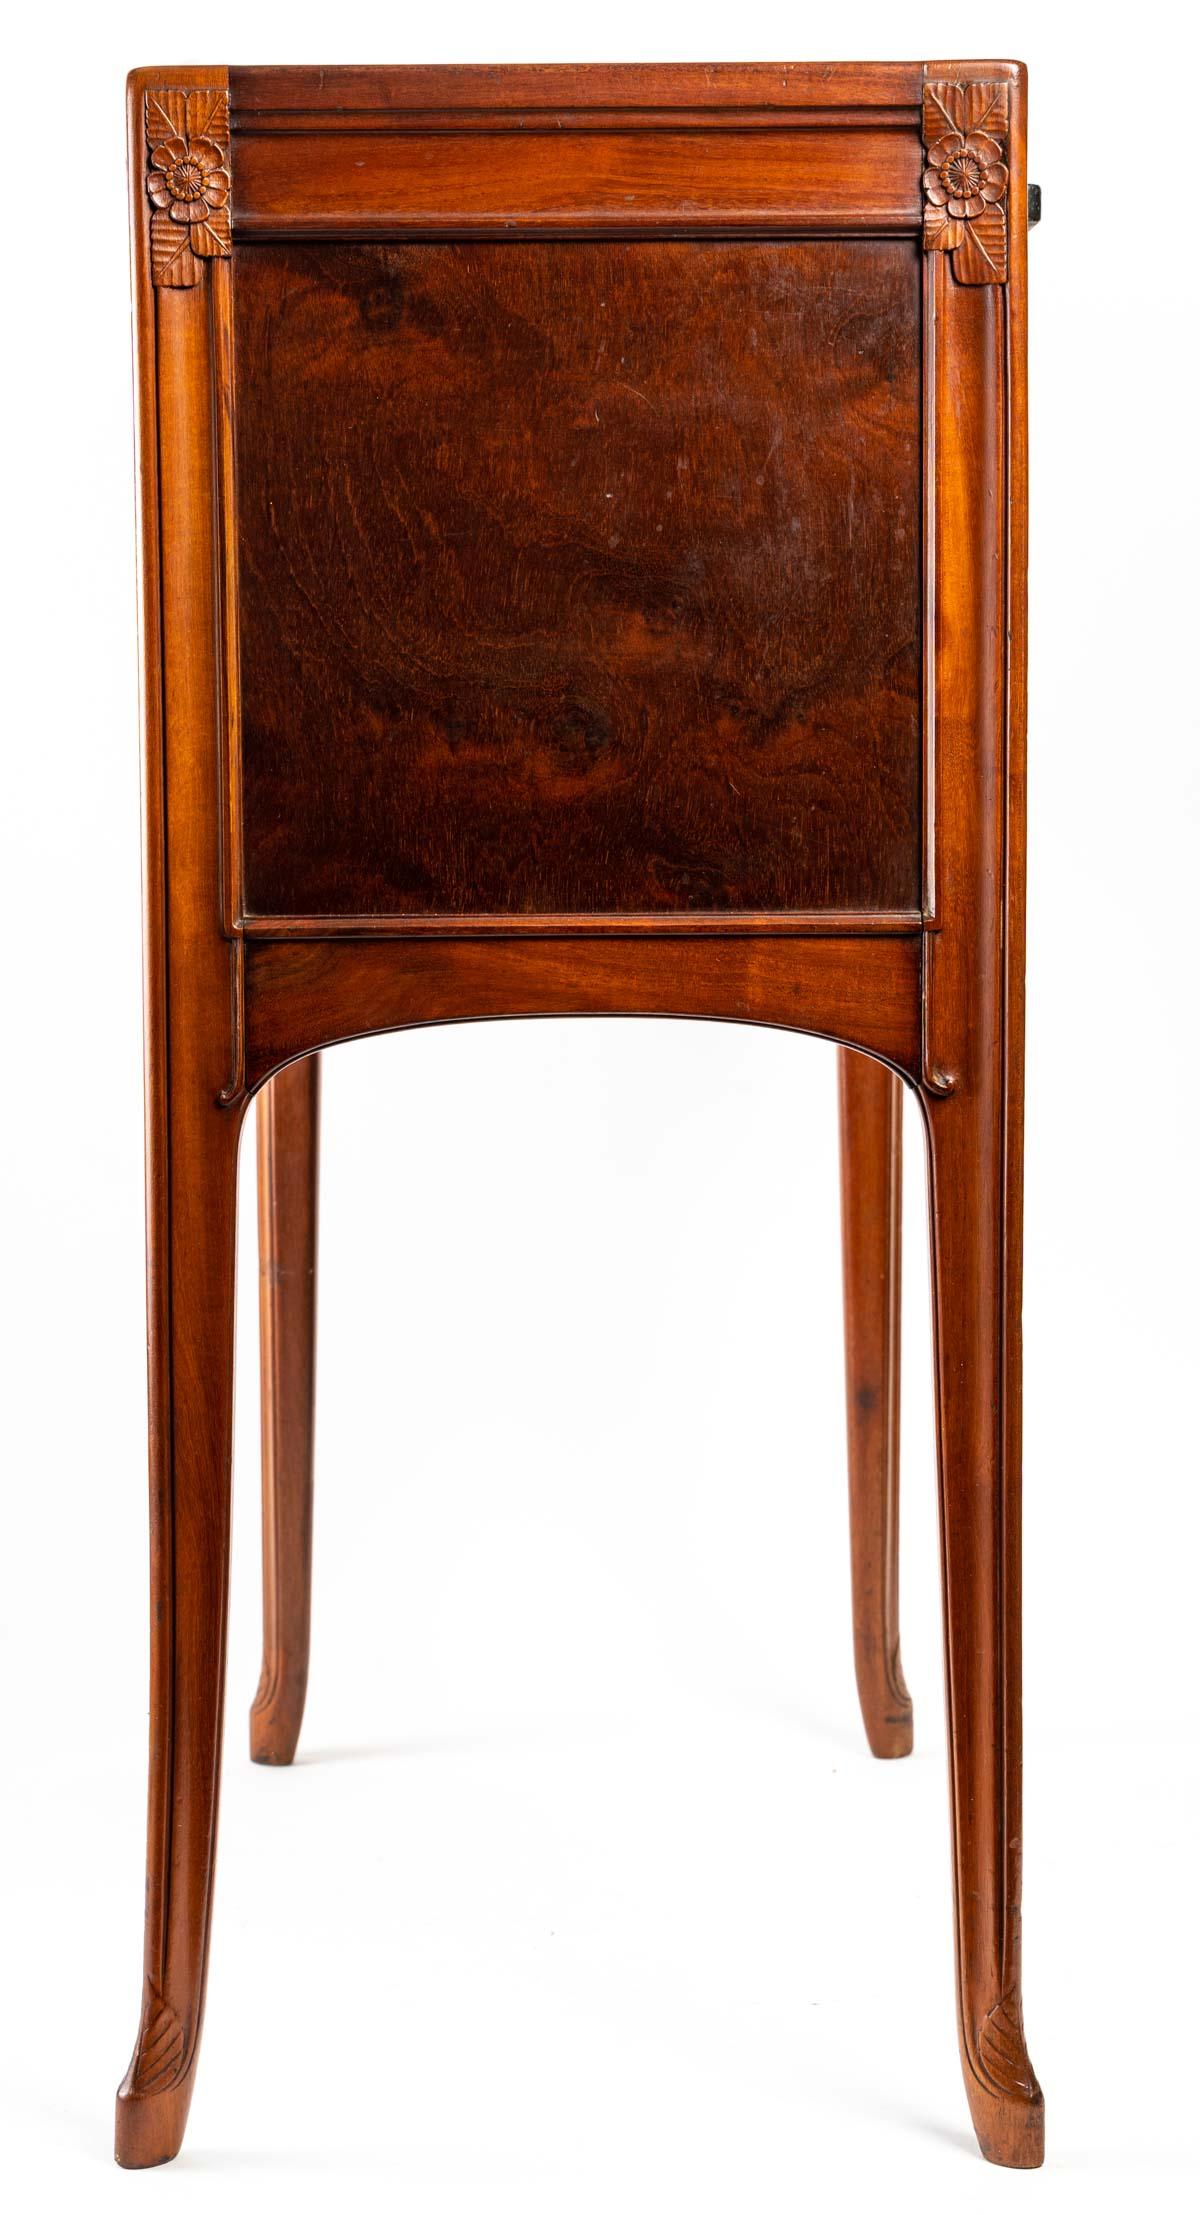 Léon Jallot, small support furniture
circa 1910 in mahogany. On the front 2 real drawers and 2 false drawers.
Measures: H 60 cm, W 80 cm, D 34 cm.